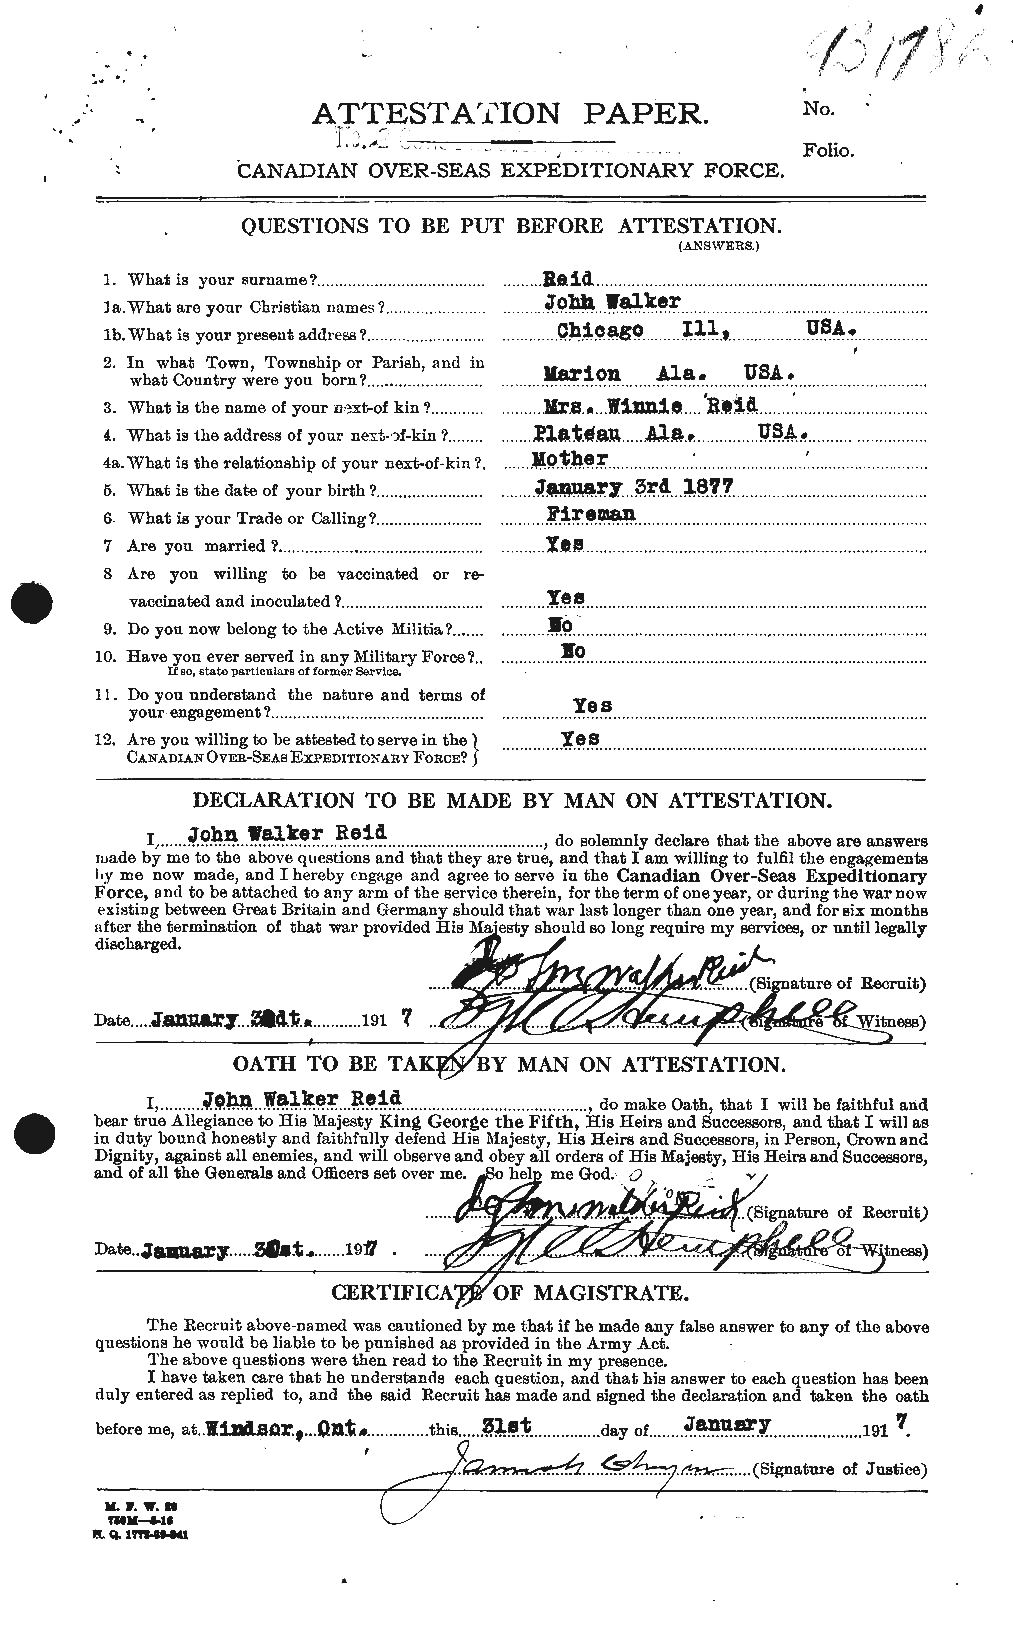 Personnel Records of the First World War - CEF 598878a